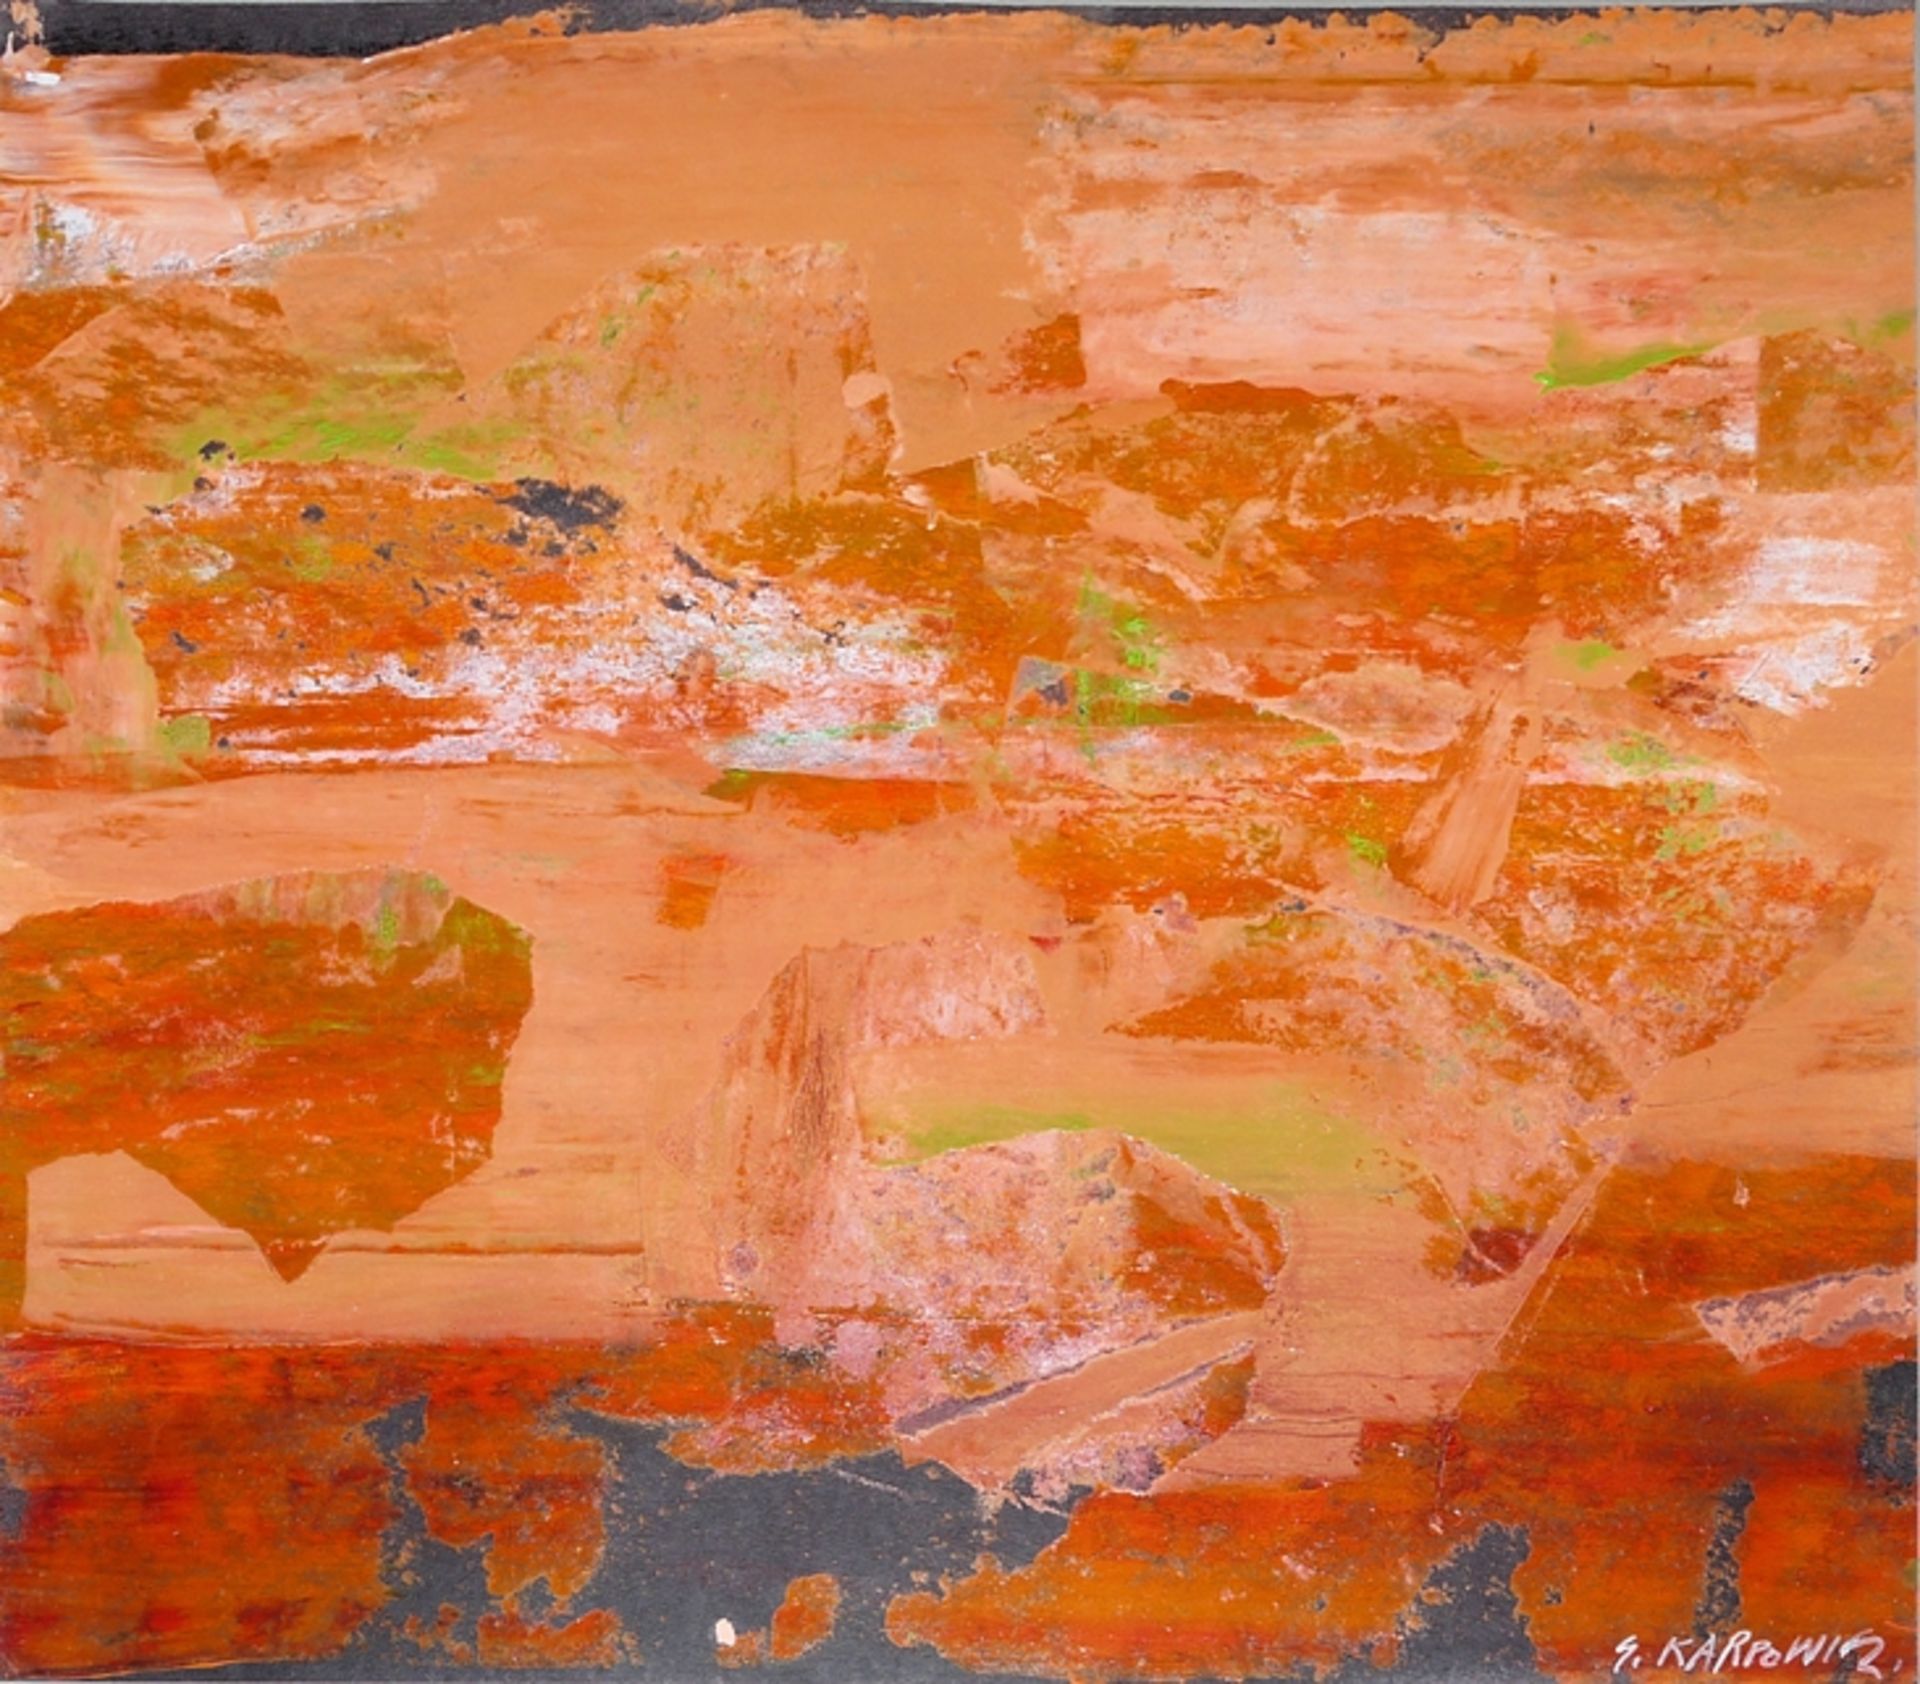 Slawomir Karpowicz, Abstract Landscapes, 3 oil paintings from 1992 - Image 5 of 6